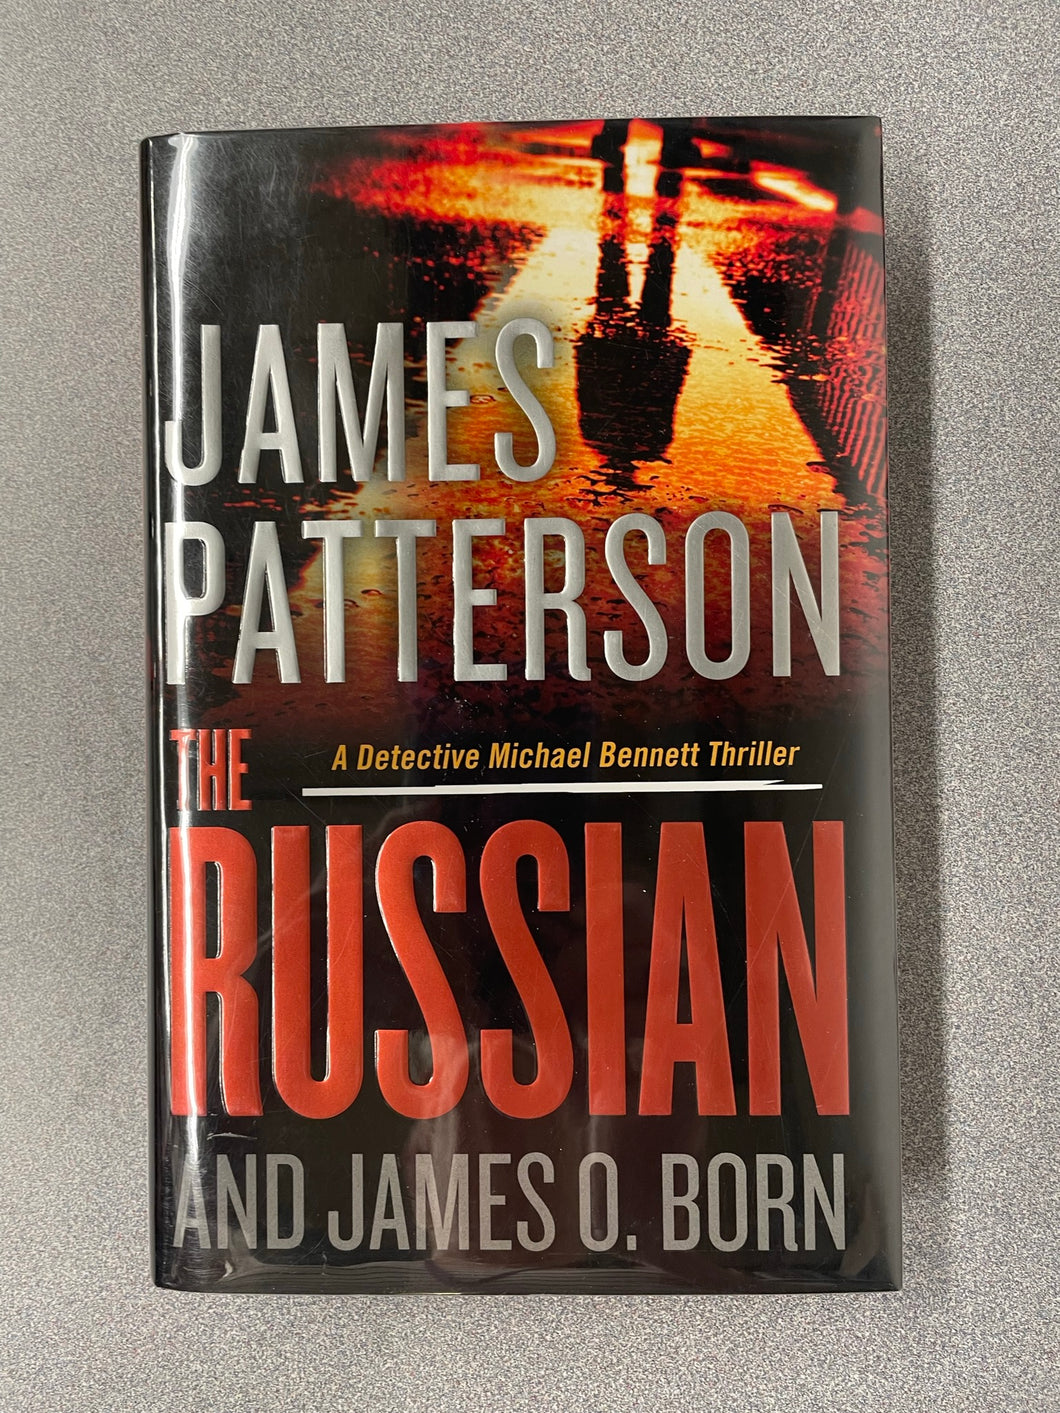 Patterson, James and James O. Born, The Russian [2021] MY 6/23